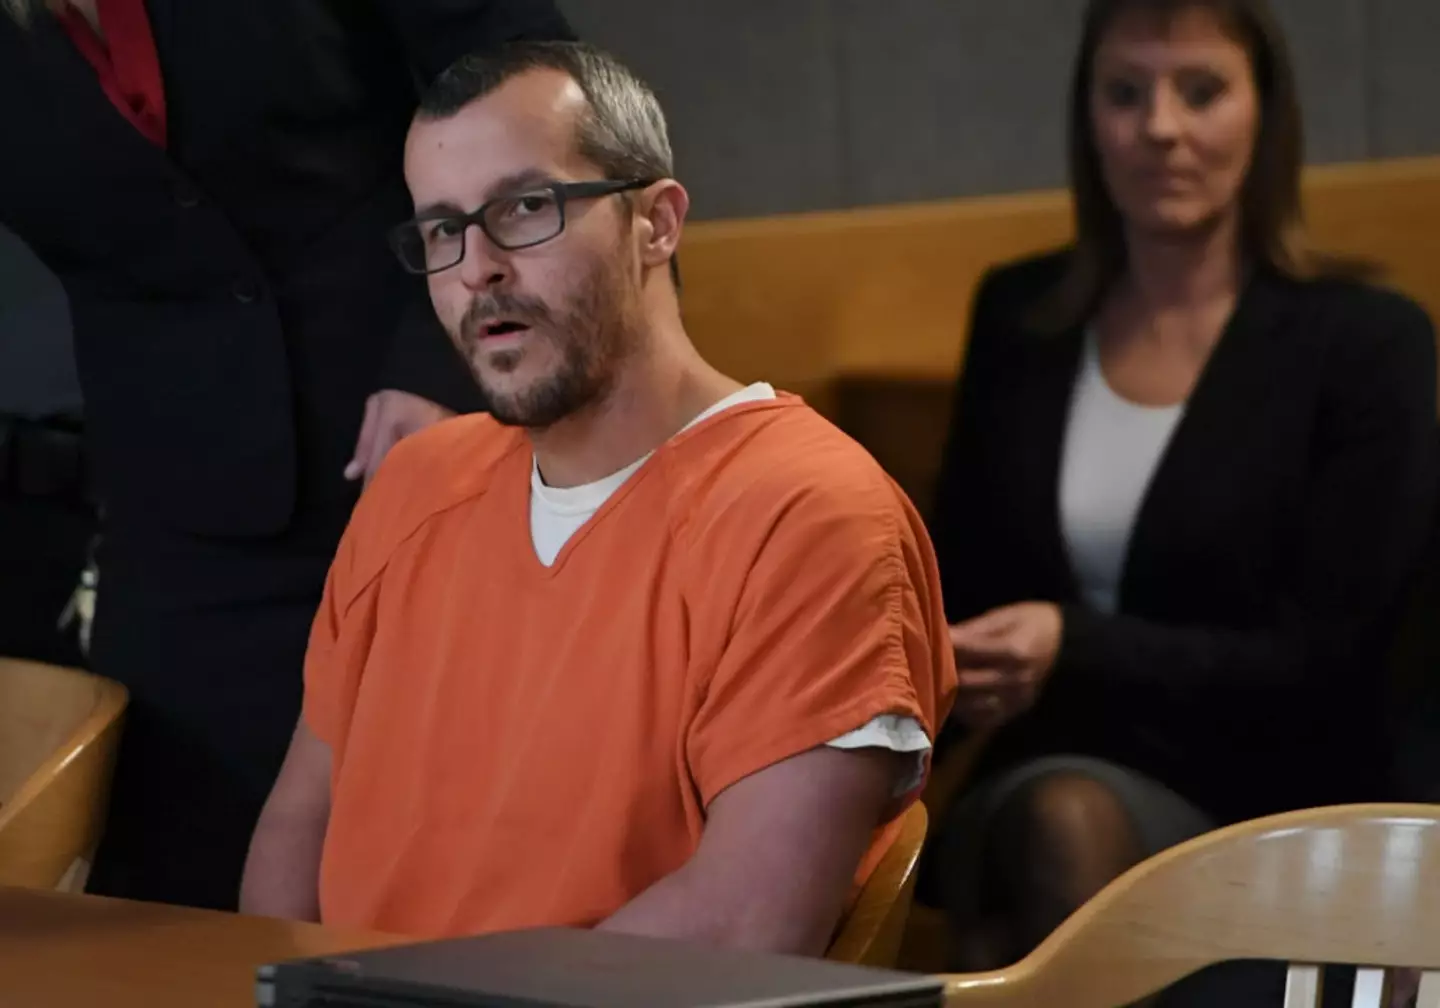 In 2018, Chris Watts pled guilty to the murders of his pregnant wife and daughters. (RJ Sangosti/The Denver Post via Getty Images)